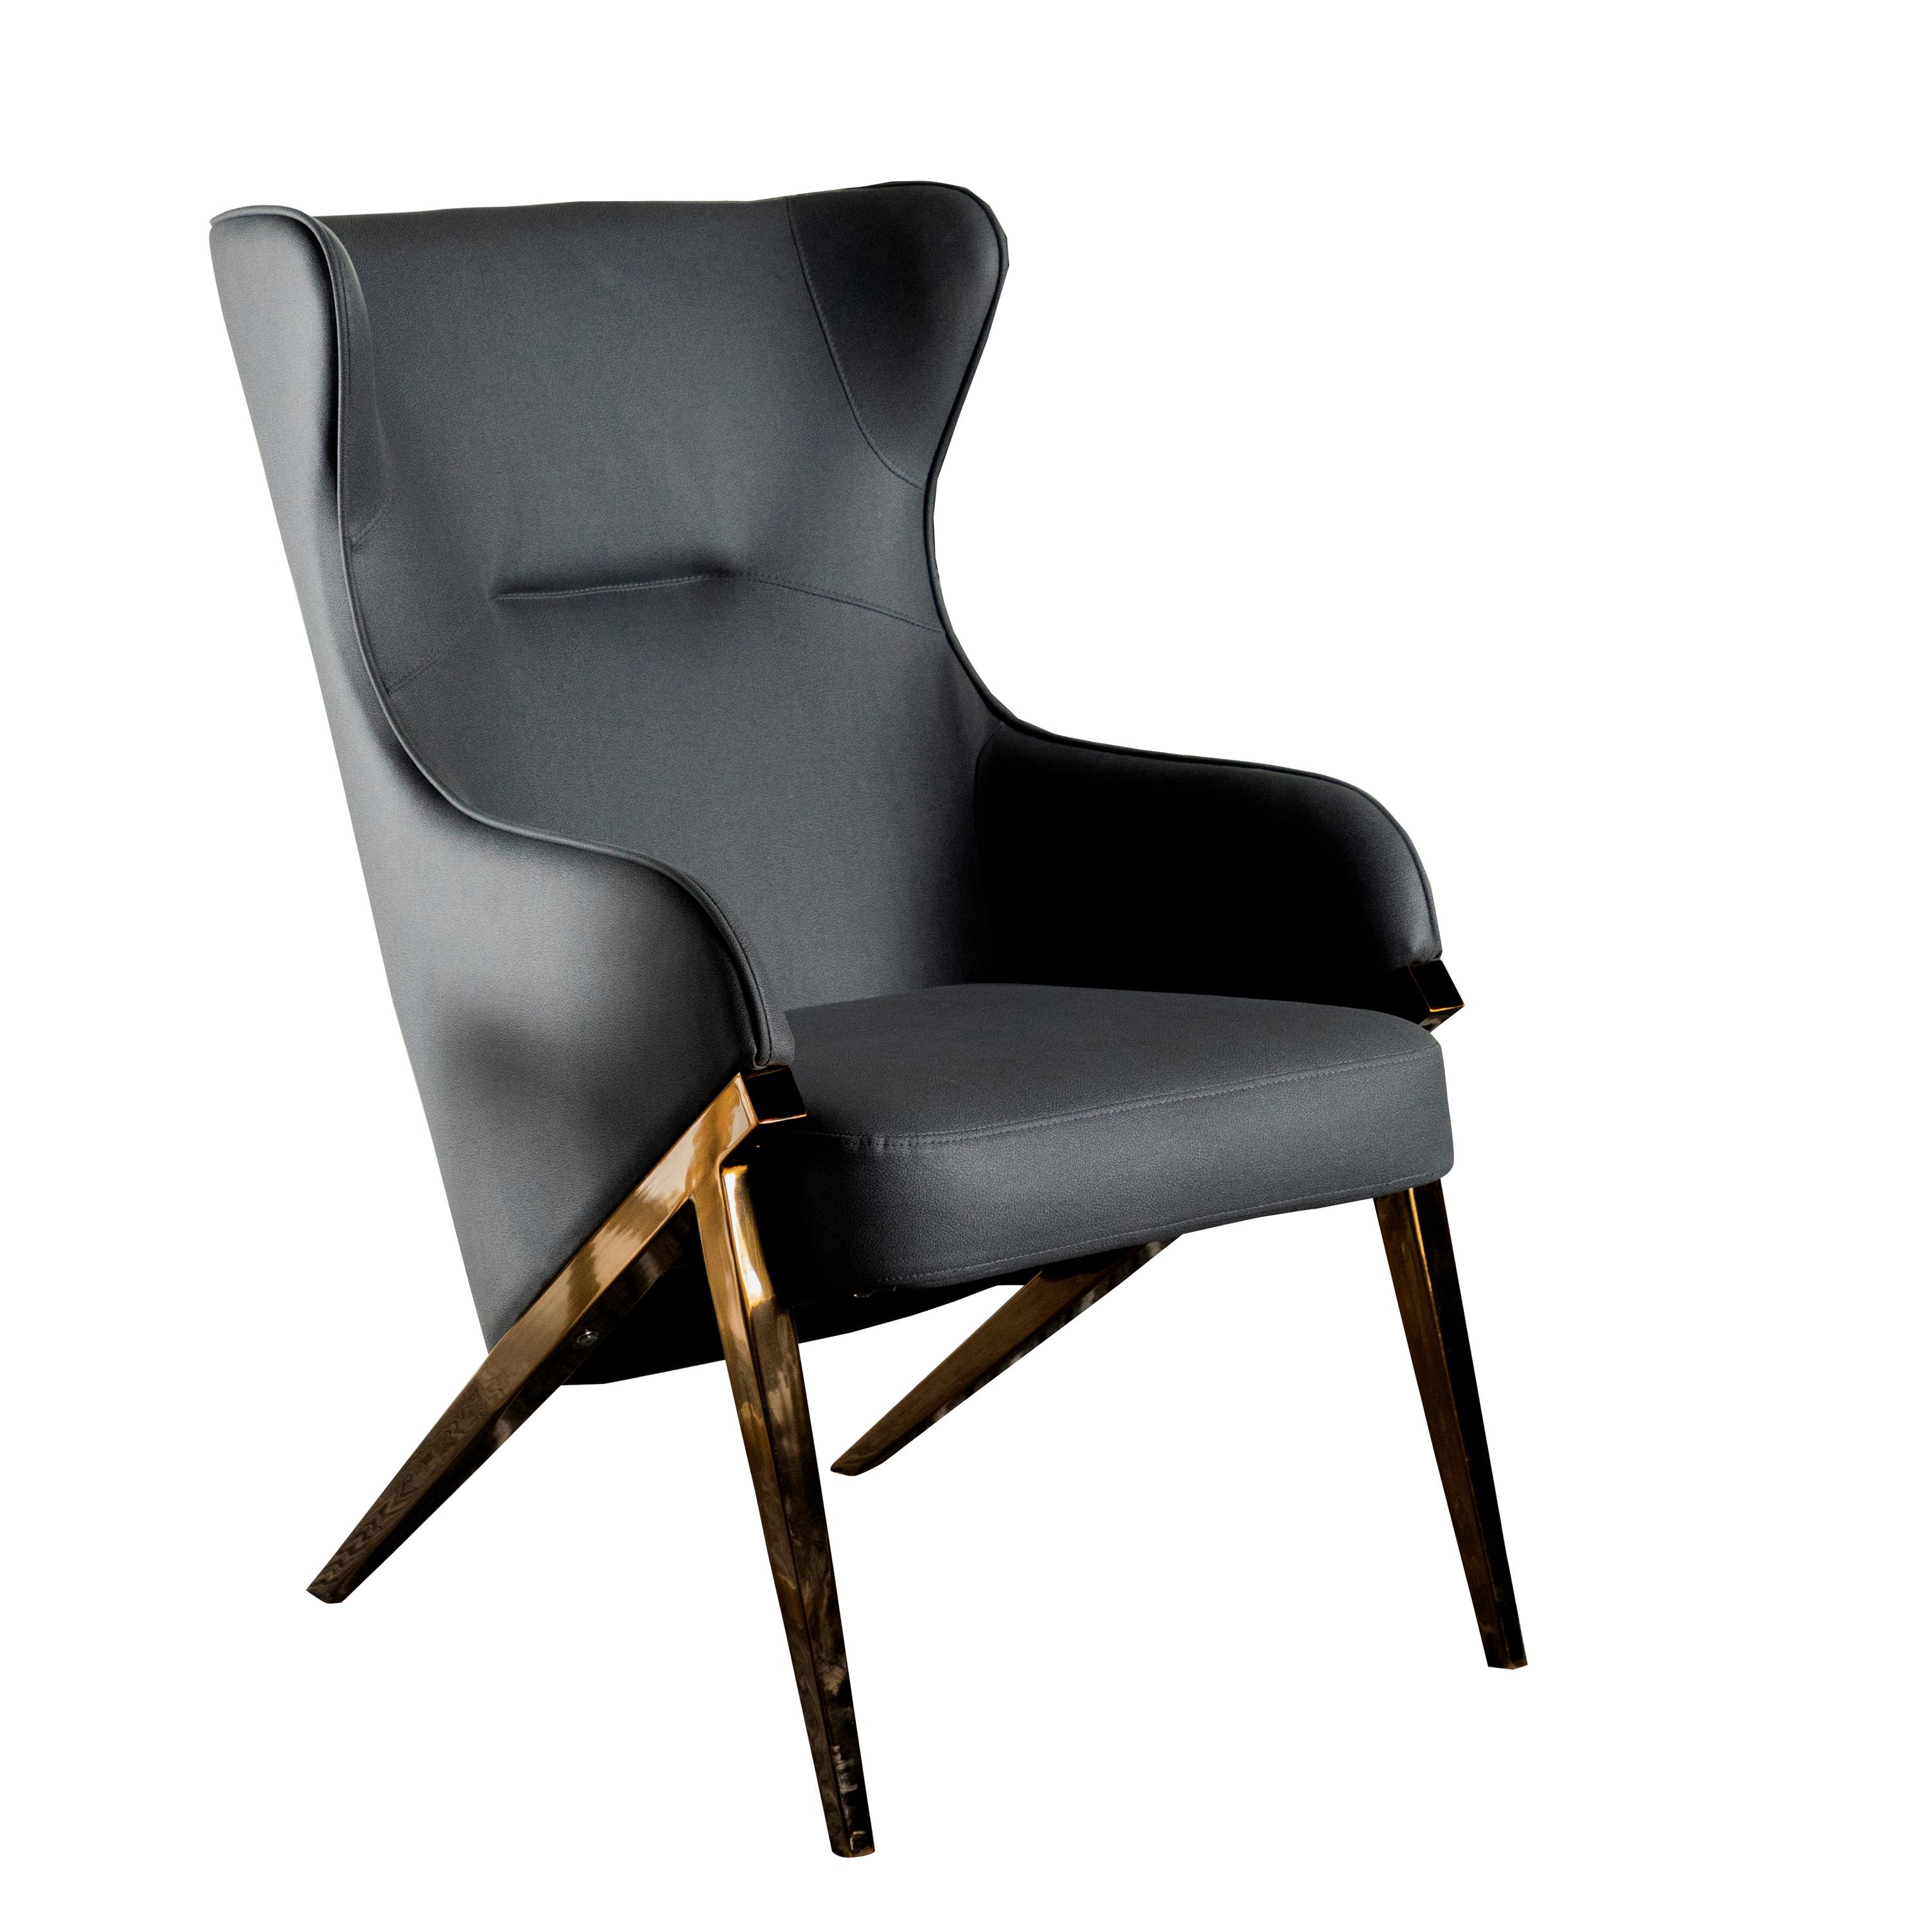 Modern Accent Chair 903053 903053 in Slate Leatherette